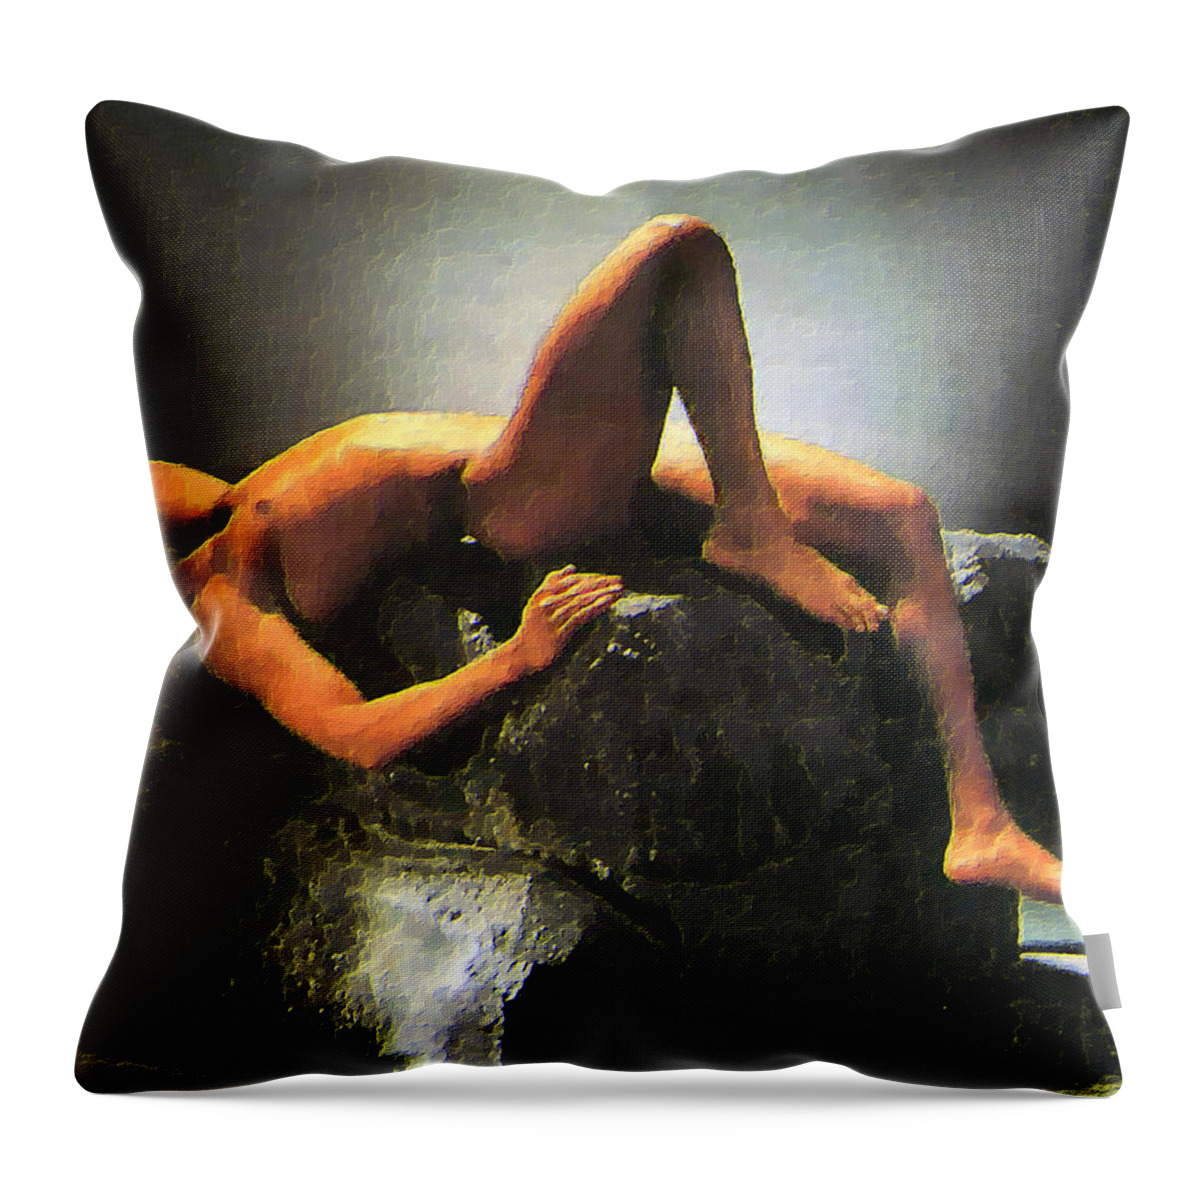 Original Throw Pillow featuring the painting Modern Prometheus  by Troy Caperton